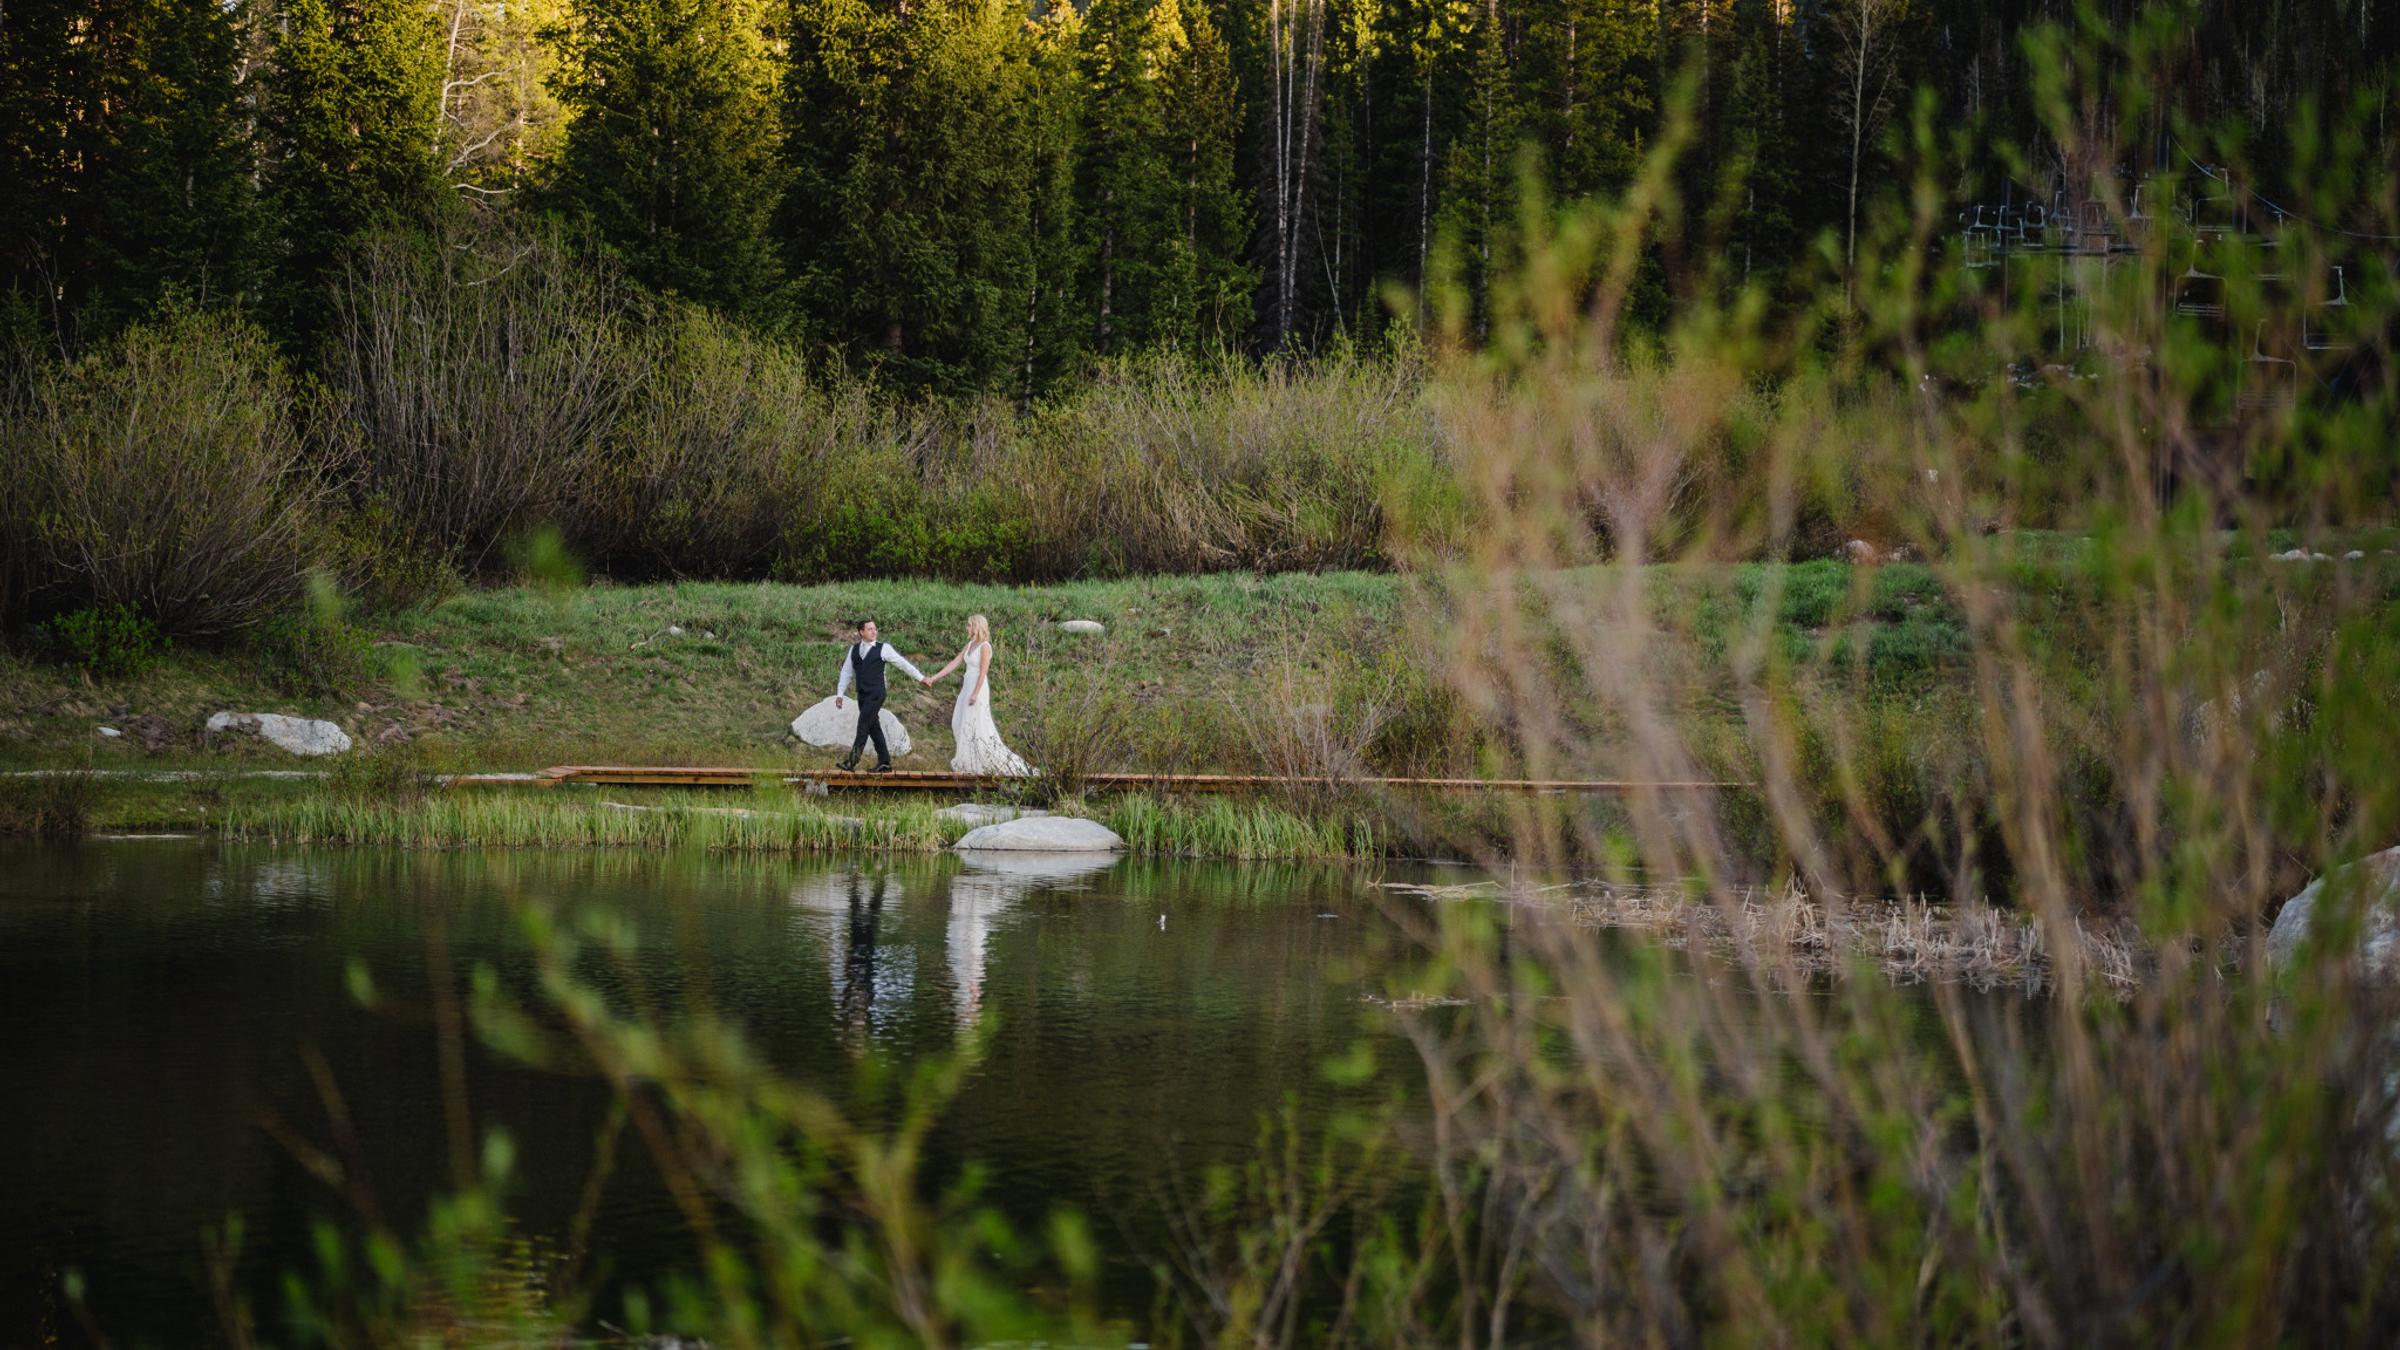 Bride and Groom at Solitude at the Solitude pond